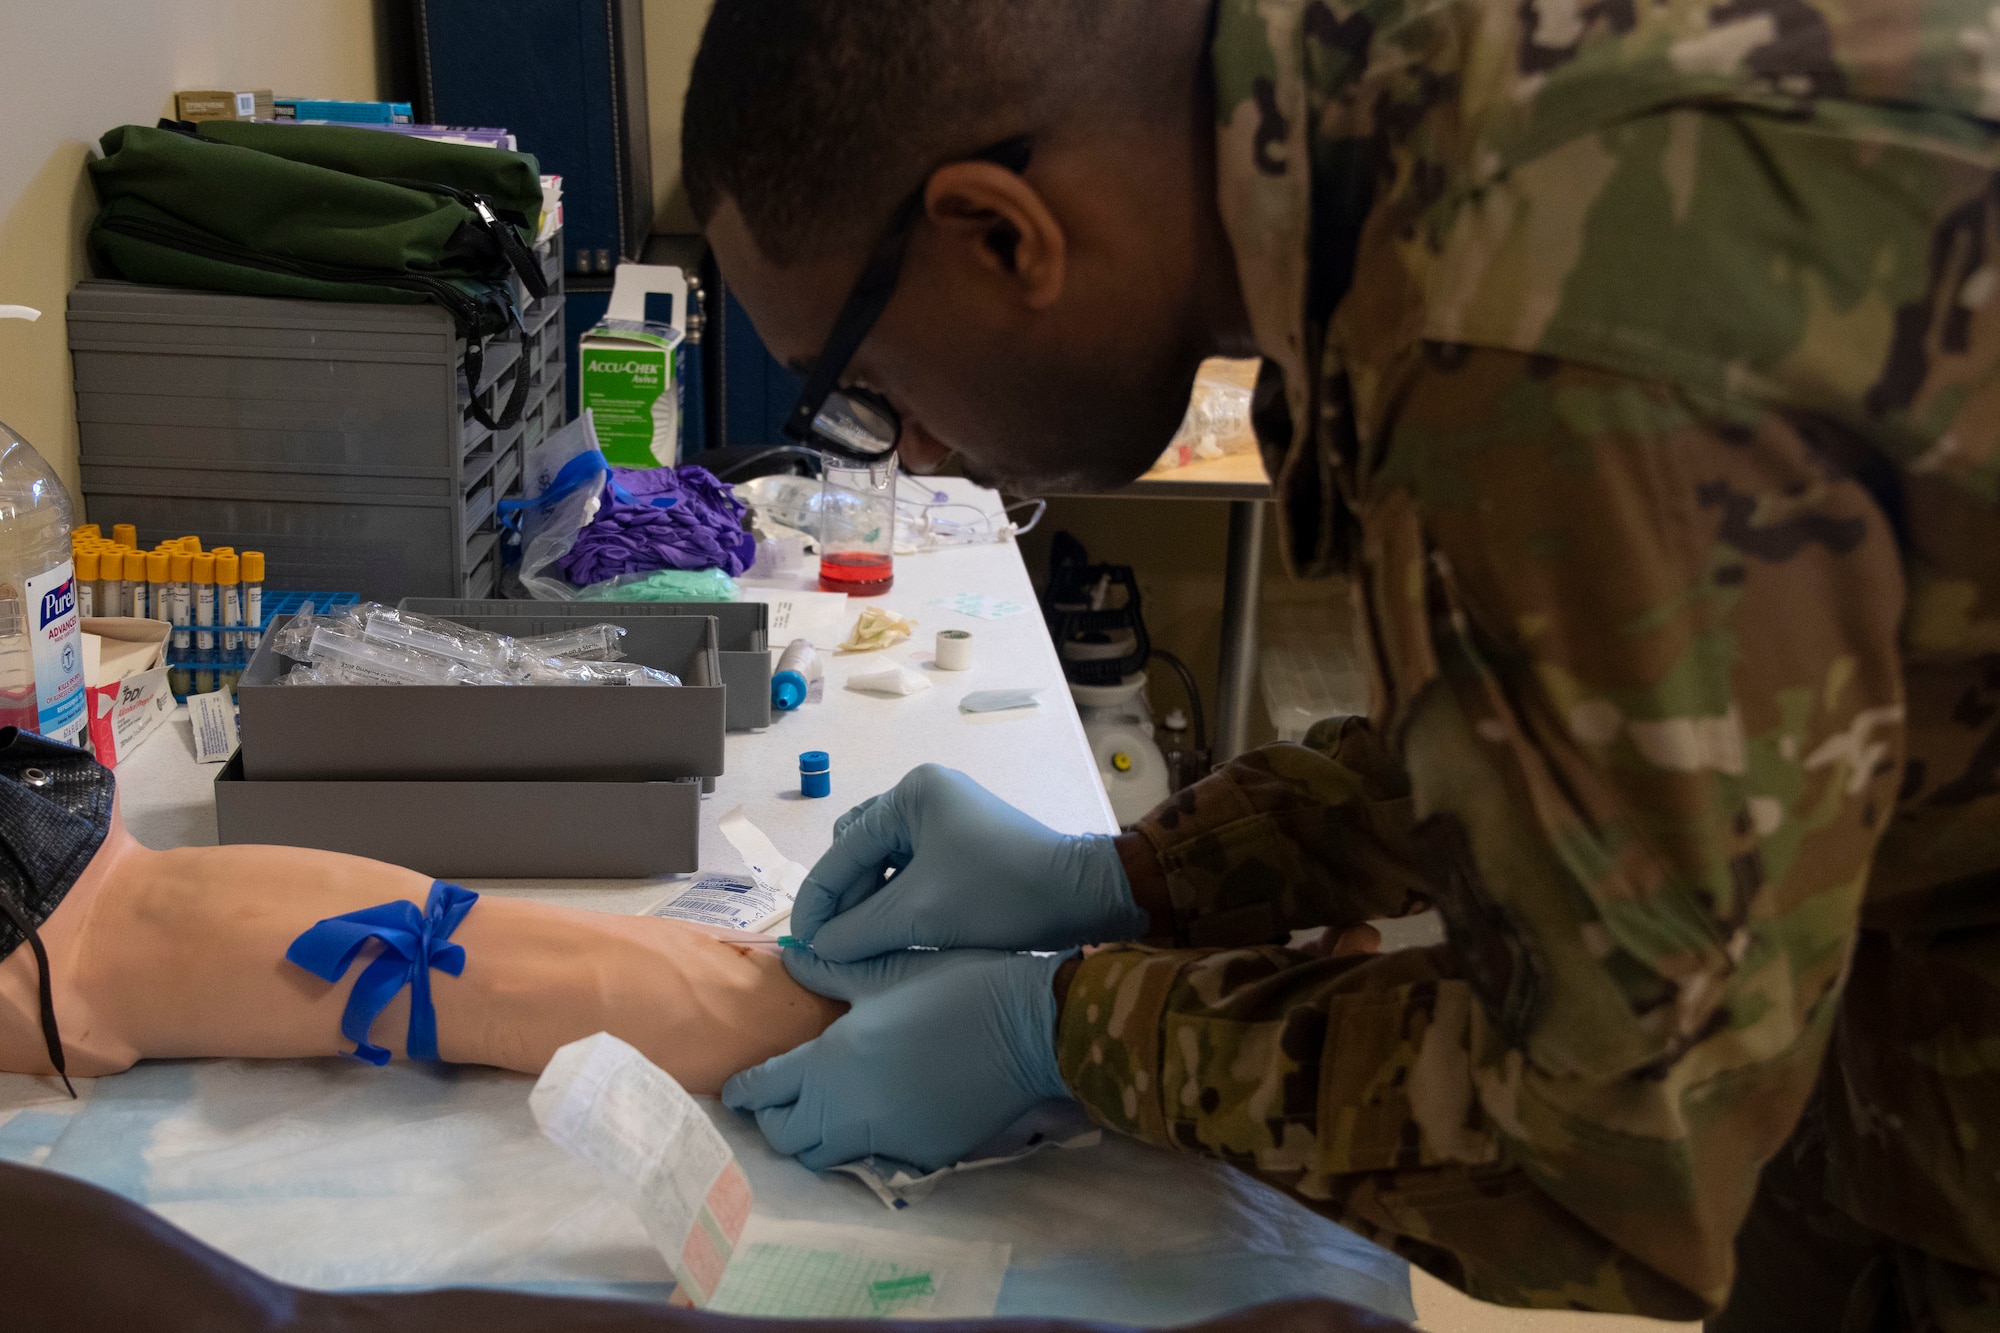 An Airman sticks a catheter into a prosthetic arm as a part of training.